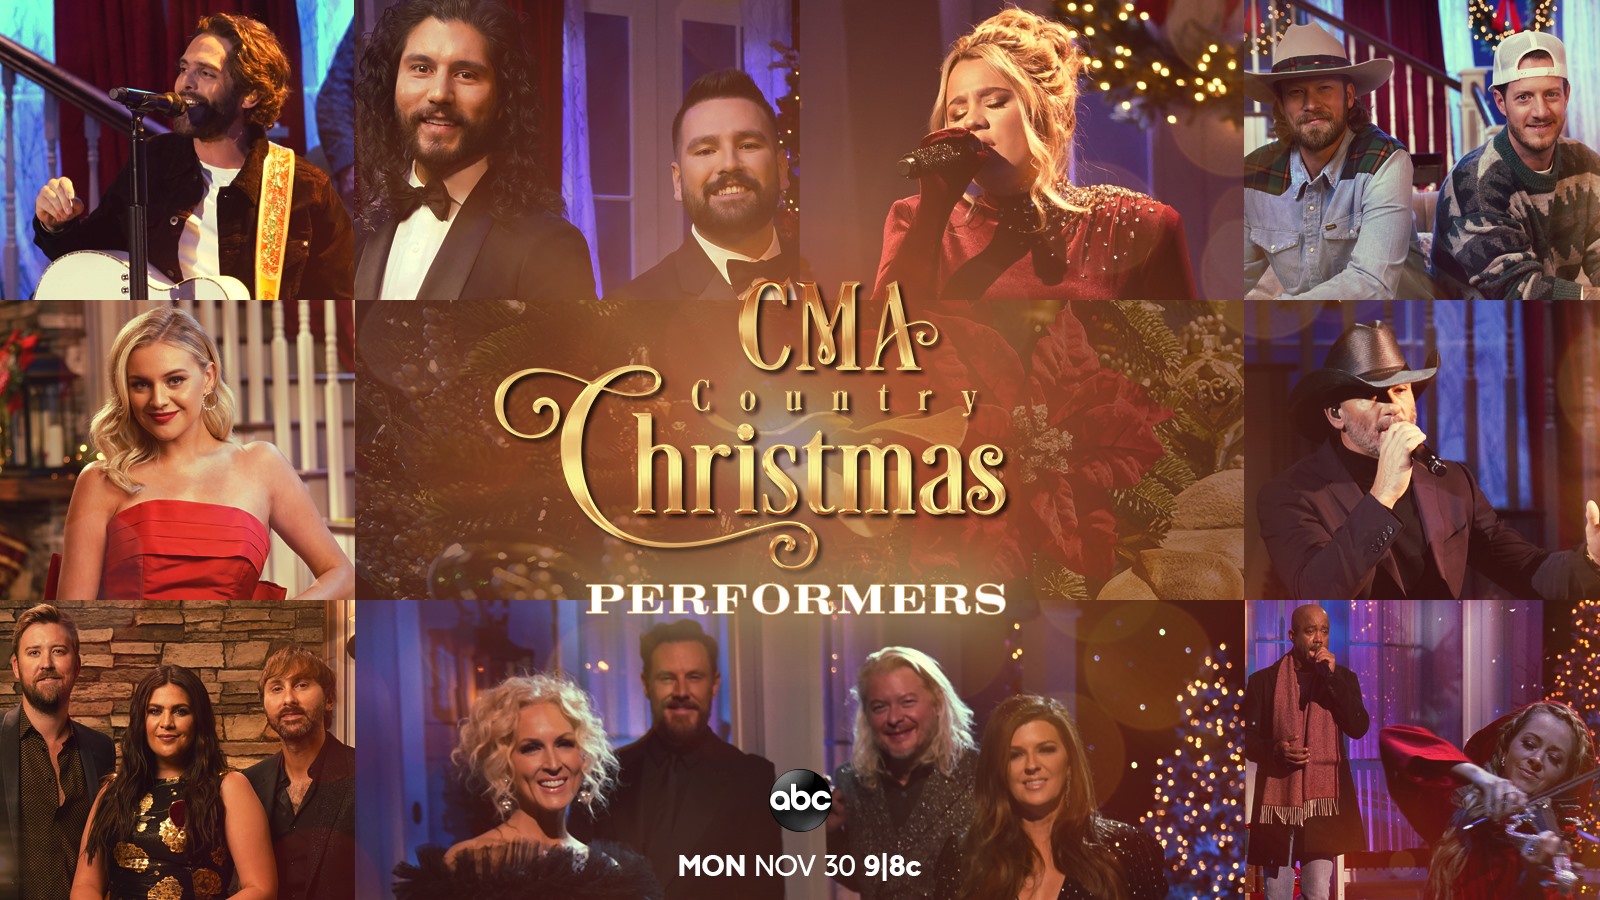 Gabby Barrett performing during the 11th annual CMA Country Christmas on ABC
